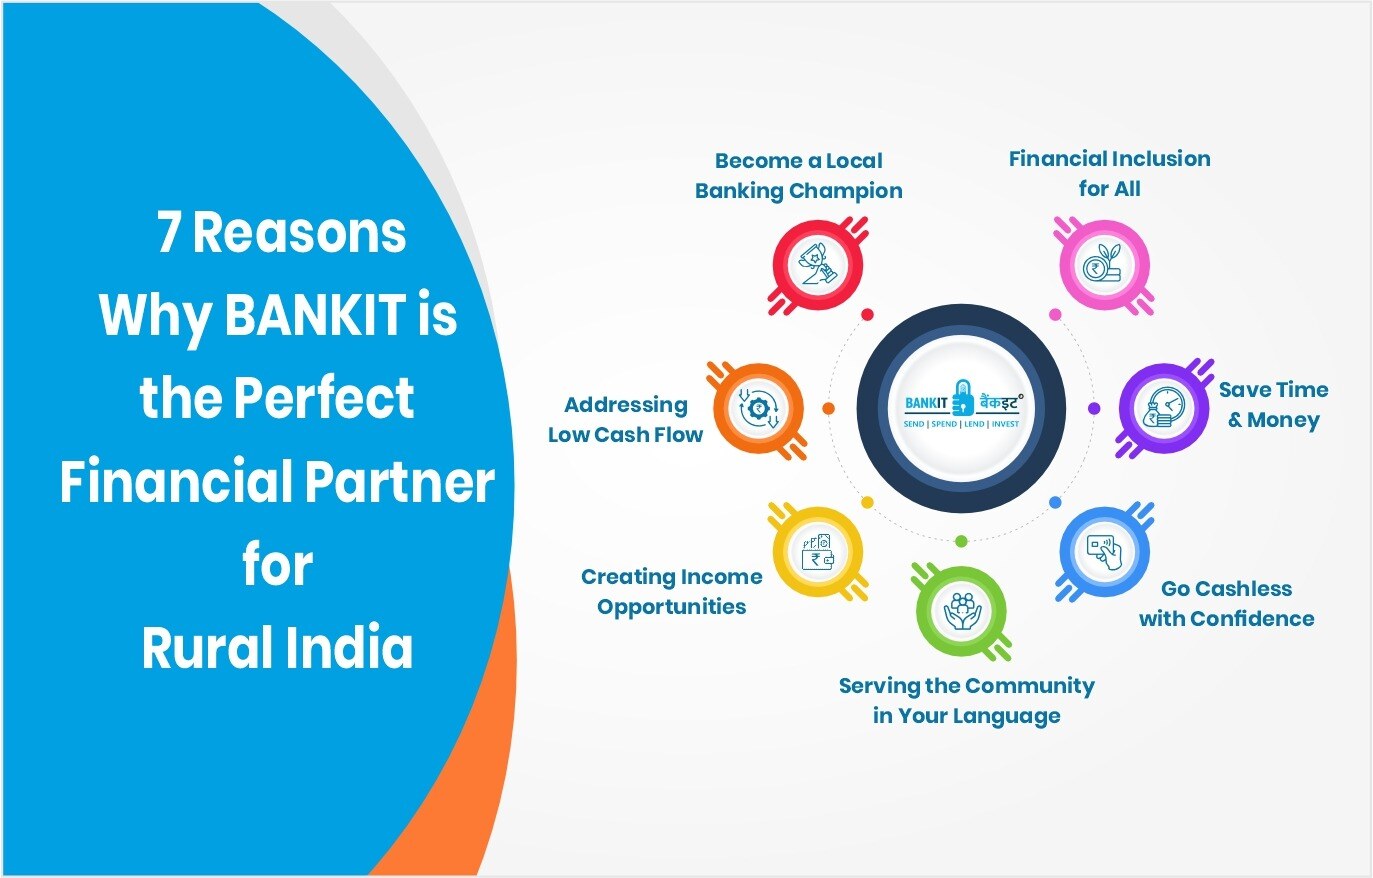 An highly engaging image showing 7 reason why BANKIT is the perfect financial partner for rural India